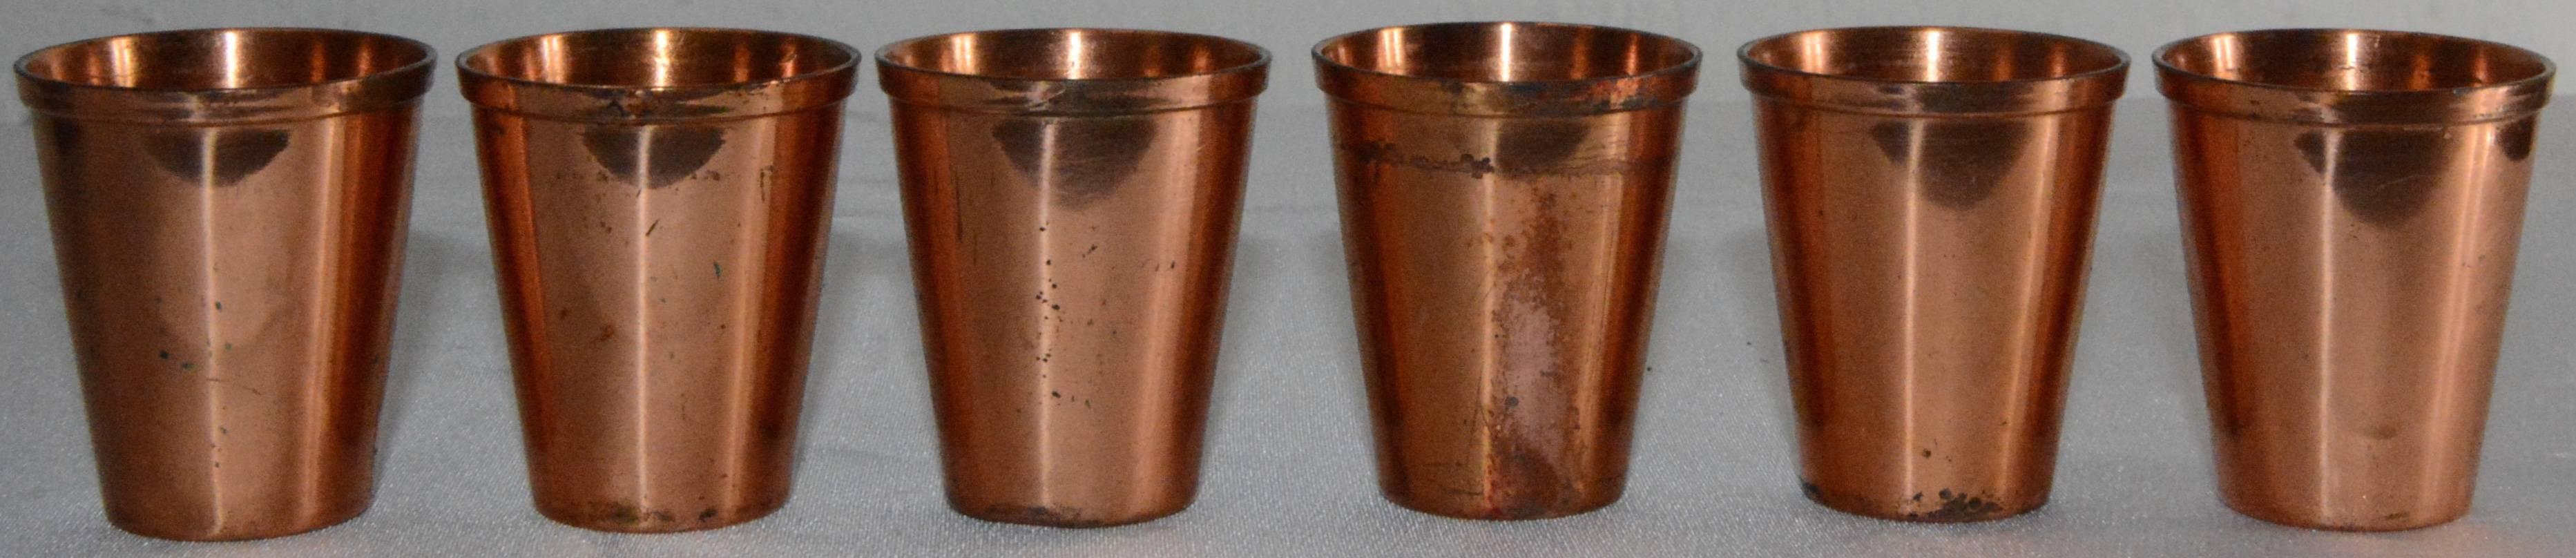 This is an interesting set of copper shot glasses with a unique leather case by West Bend. This set of six shot glasses are simple in design with tapered form and slight ridged rim. Each shot glass is stamped “Solid Copper WB” to the underside. The